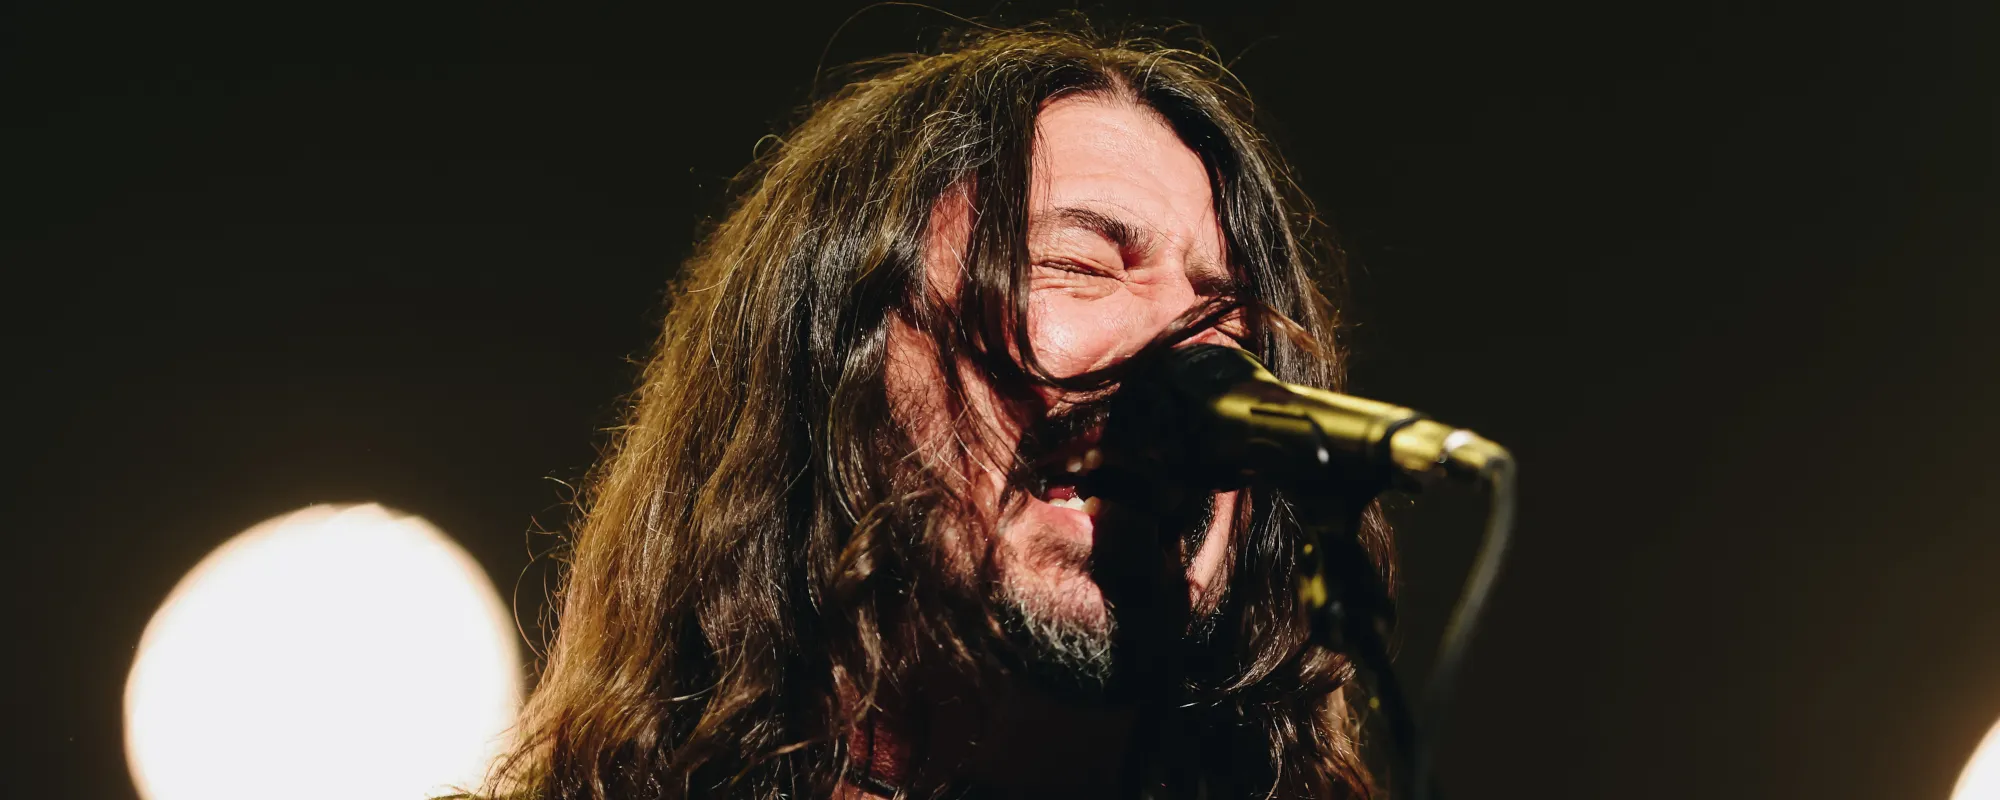 Remember When: Dave Grohl Assembled the Probot Metal Project